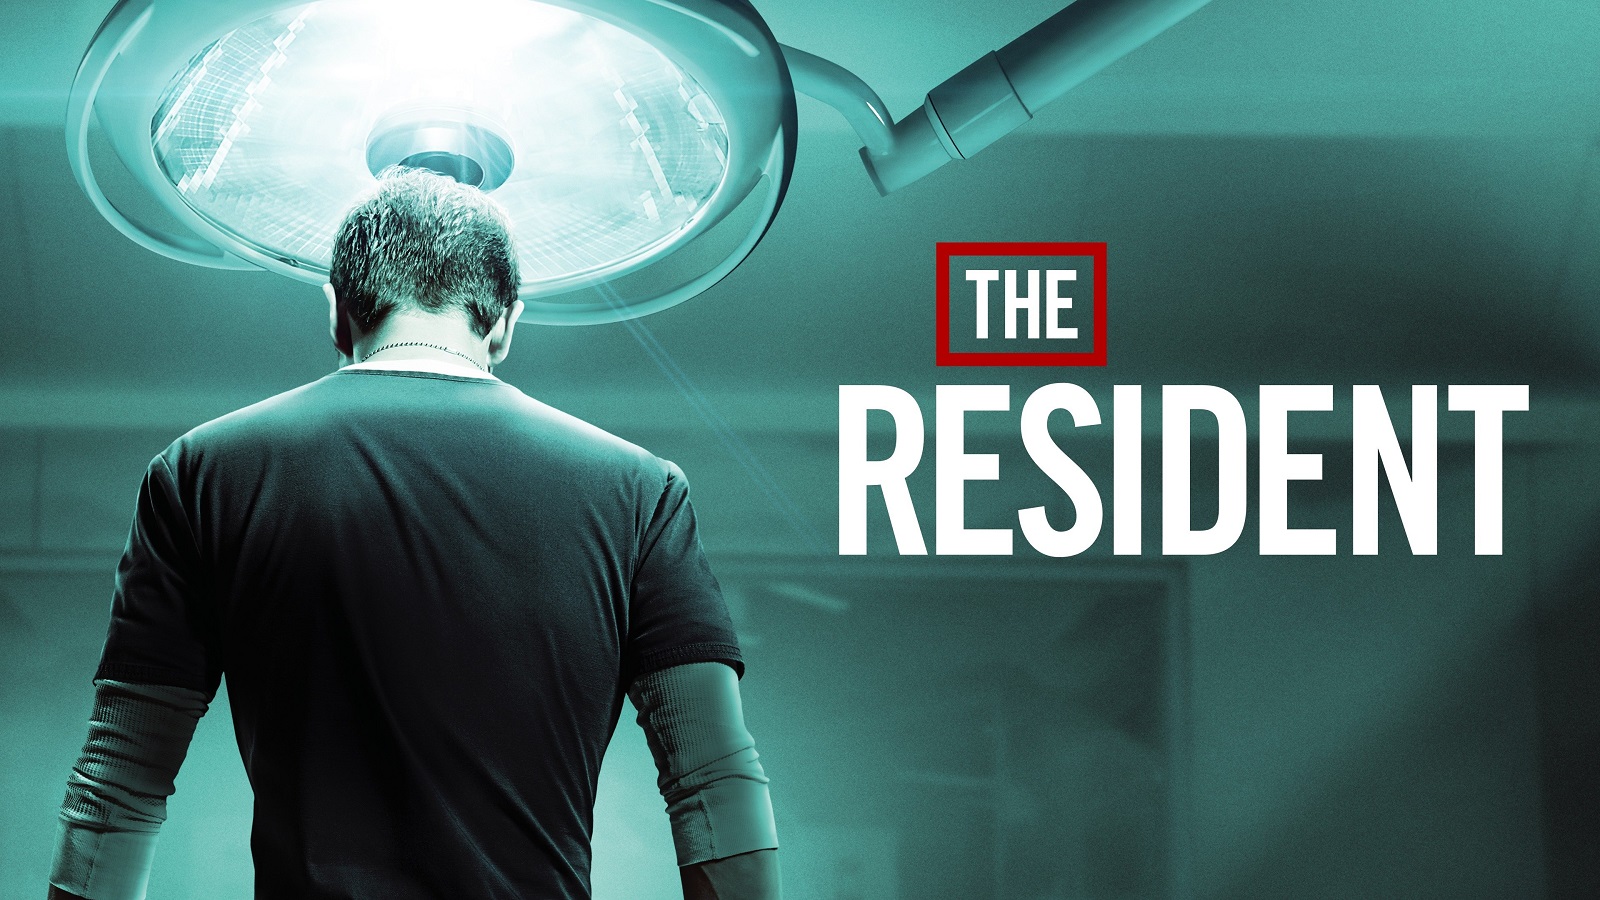 How to Watch The Resident Season 6 Online from Anywhere - TechNadu